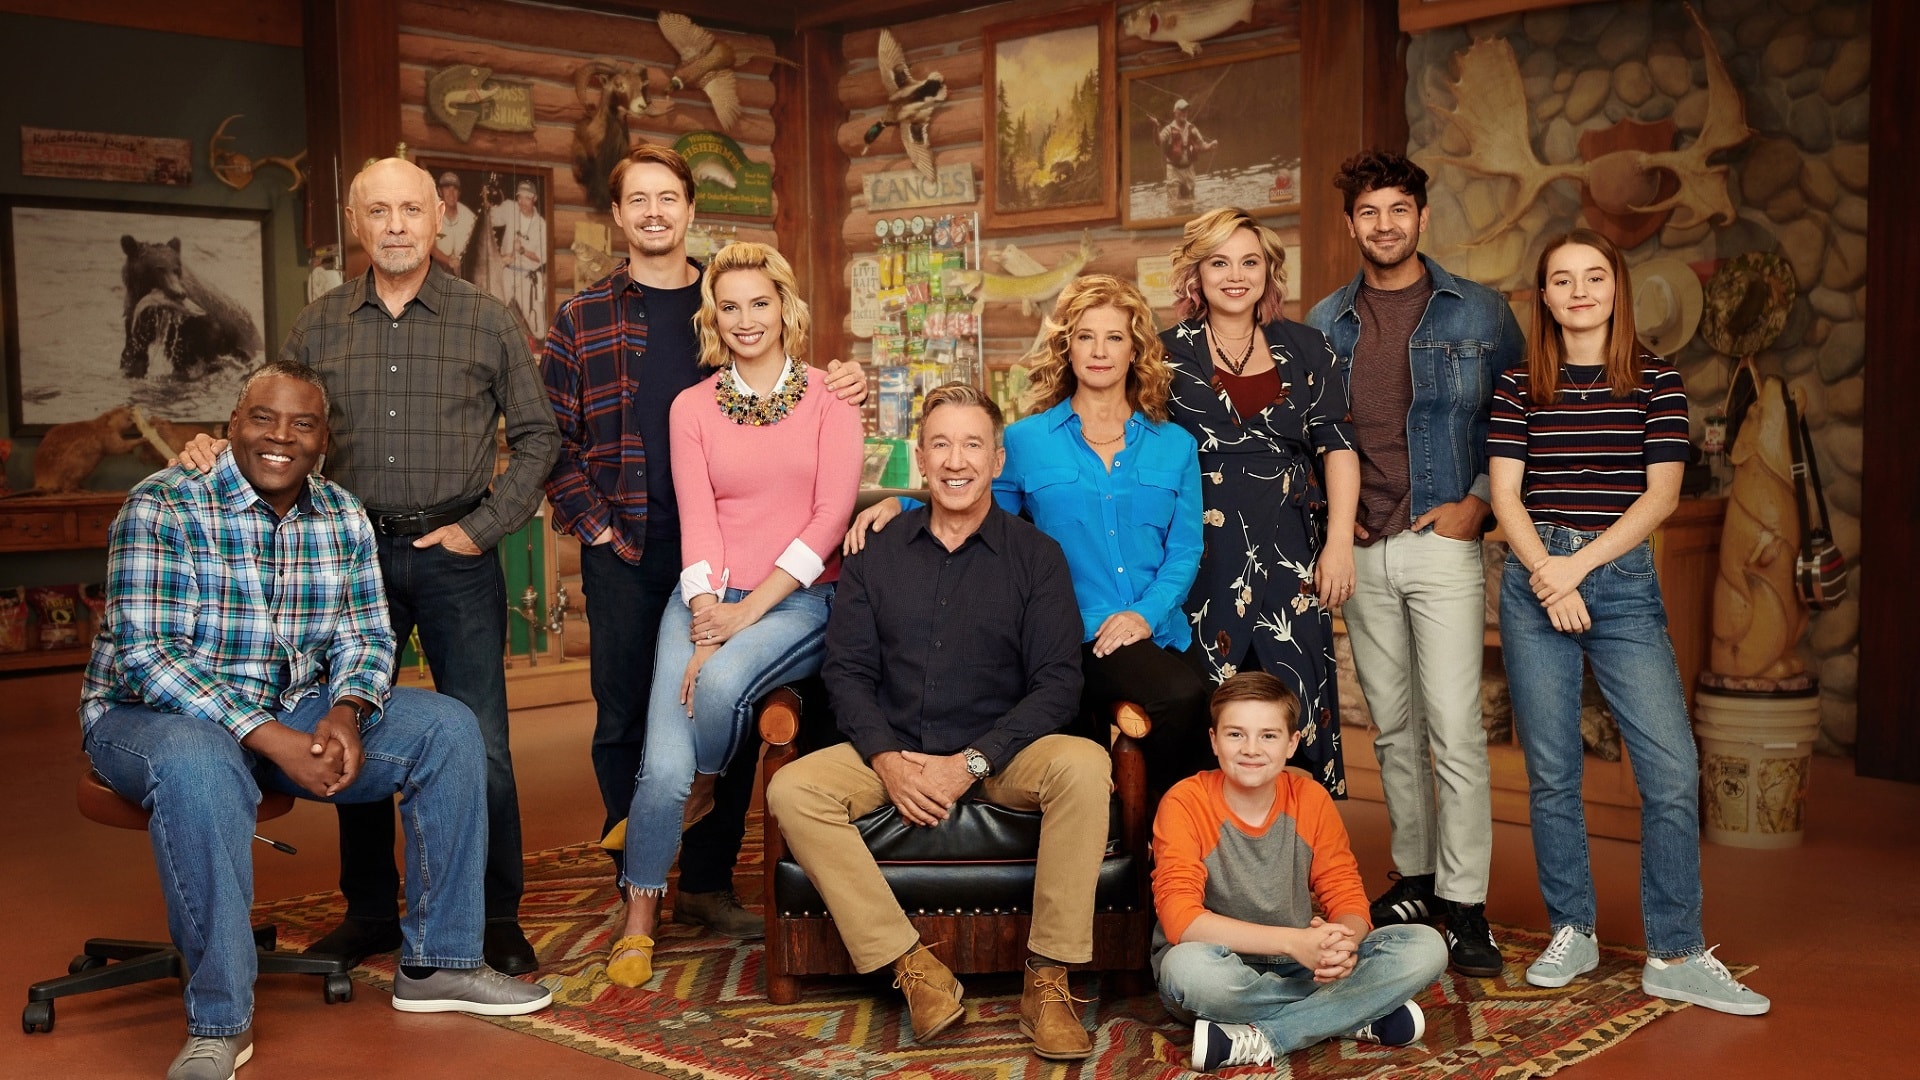 Last Man Standing Season 1 Episode 14 Odd Couple Out Watch Online On Gomovies